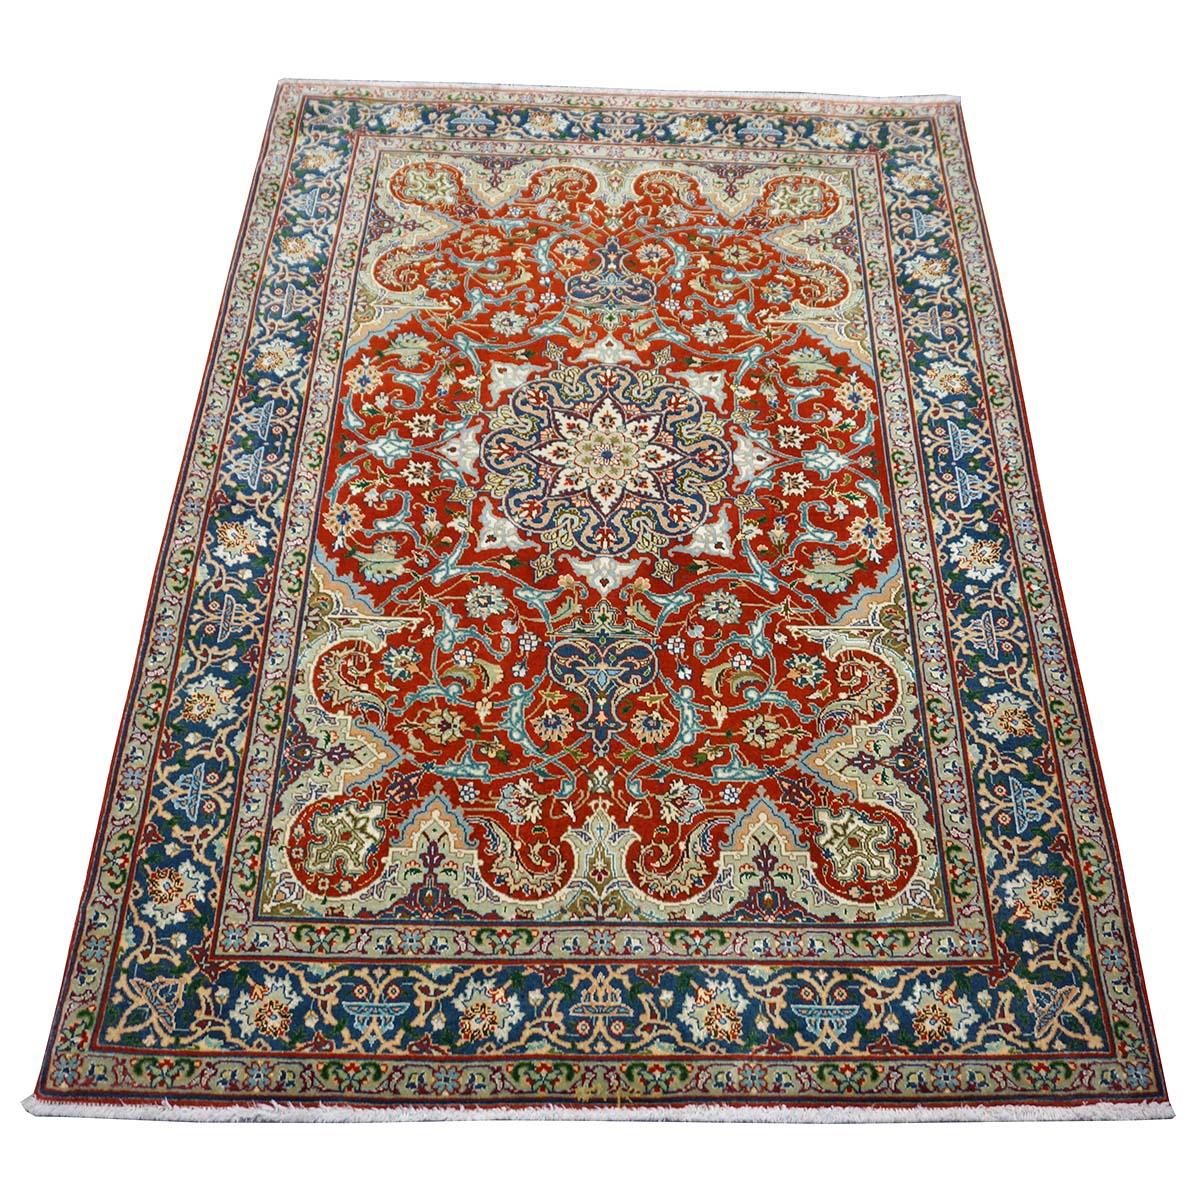 Ashly Fine Rugs presents an extremely fine 1940s Antique Persian Tabriz 3x4 Handmade Area Rug. Tabriz is a northern city in modern-day Iran and has forever been famous for the fineness and craftsmanship of its handmade rugs. This piece has a